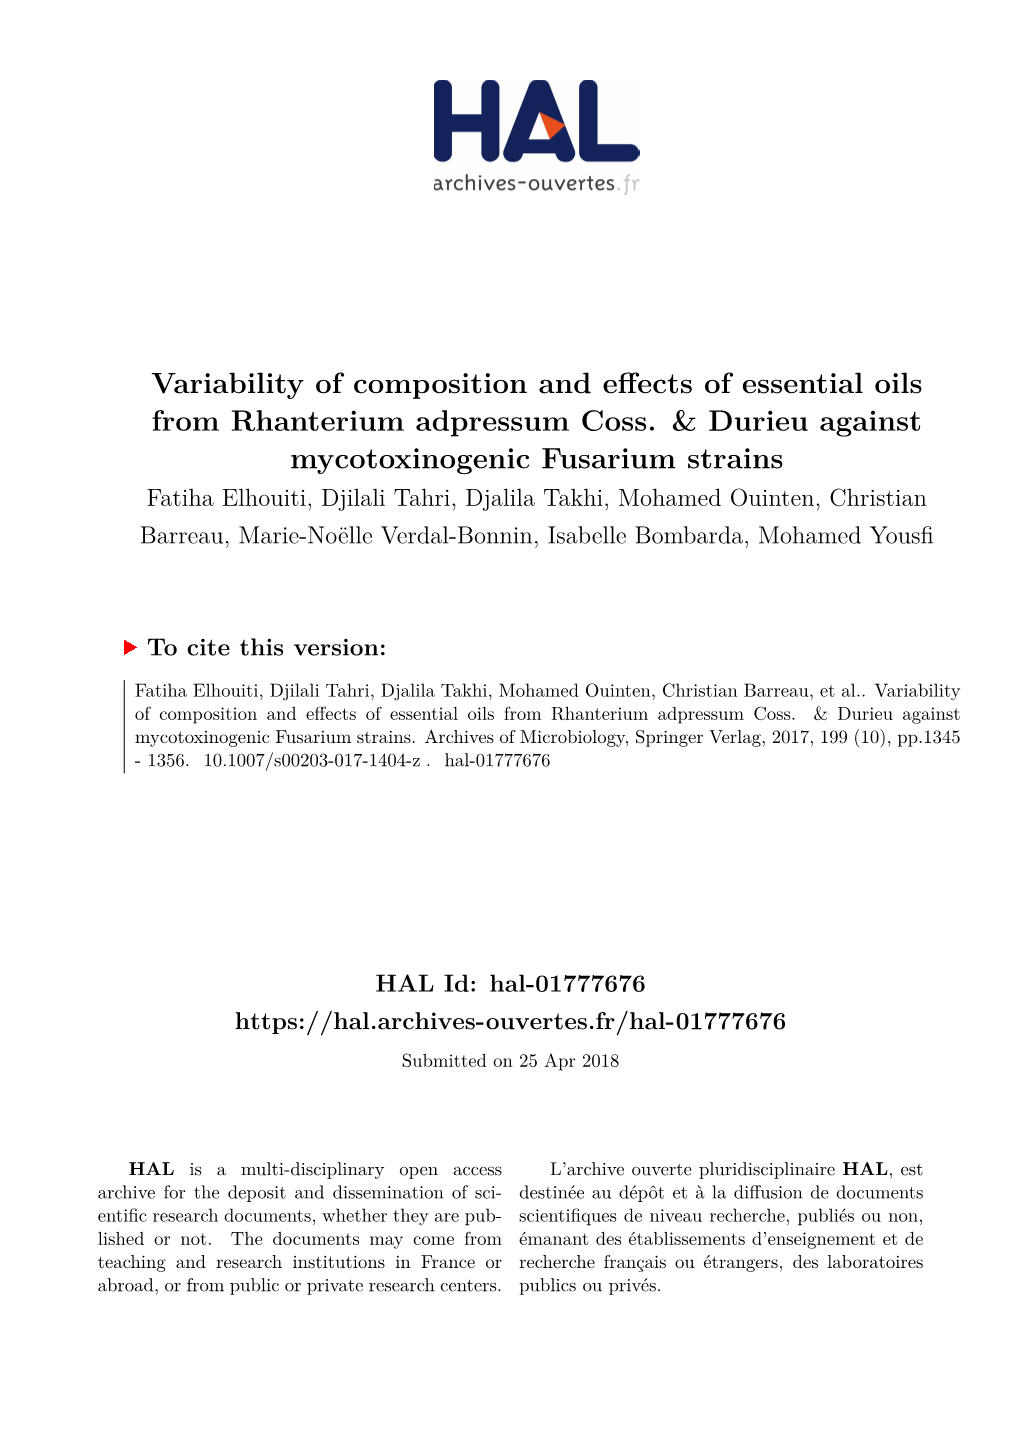 Variability of Composition and Effects of Essential Oils from Rhanterium Adpressum Coss